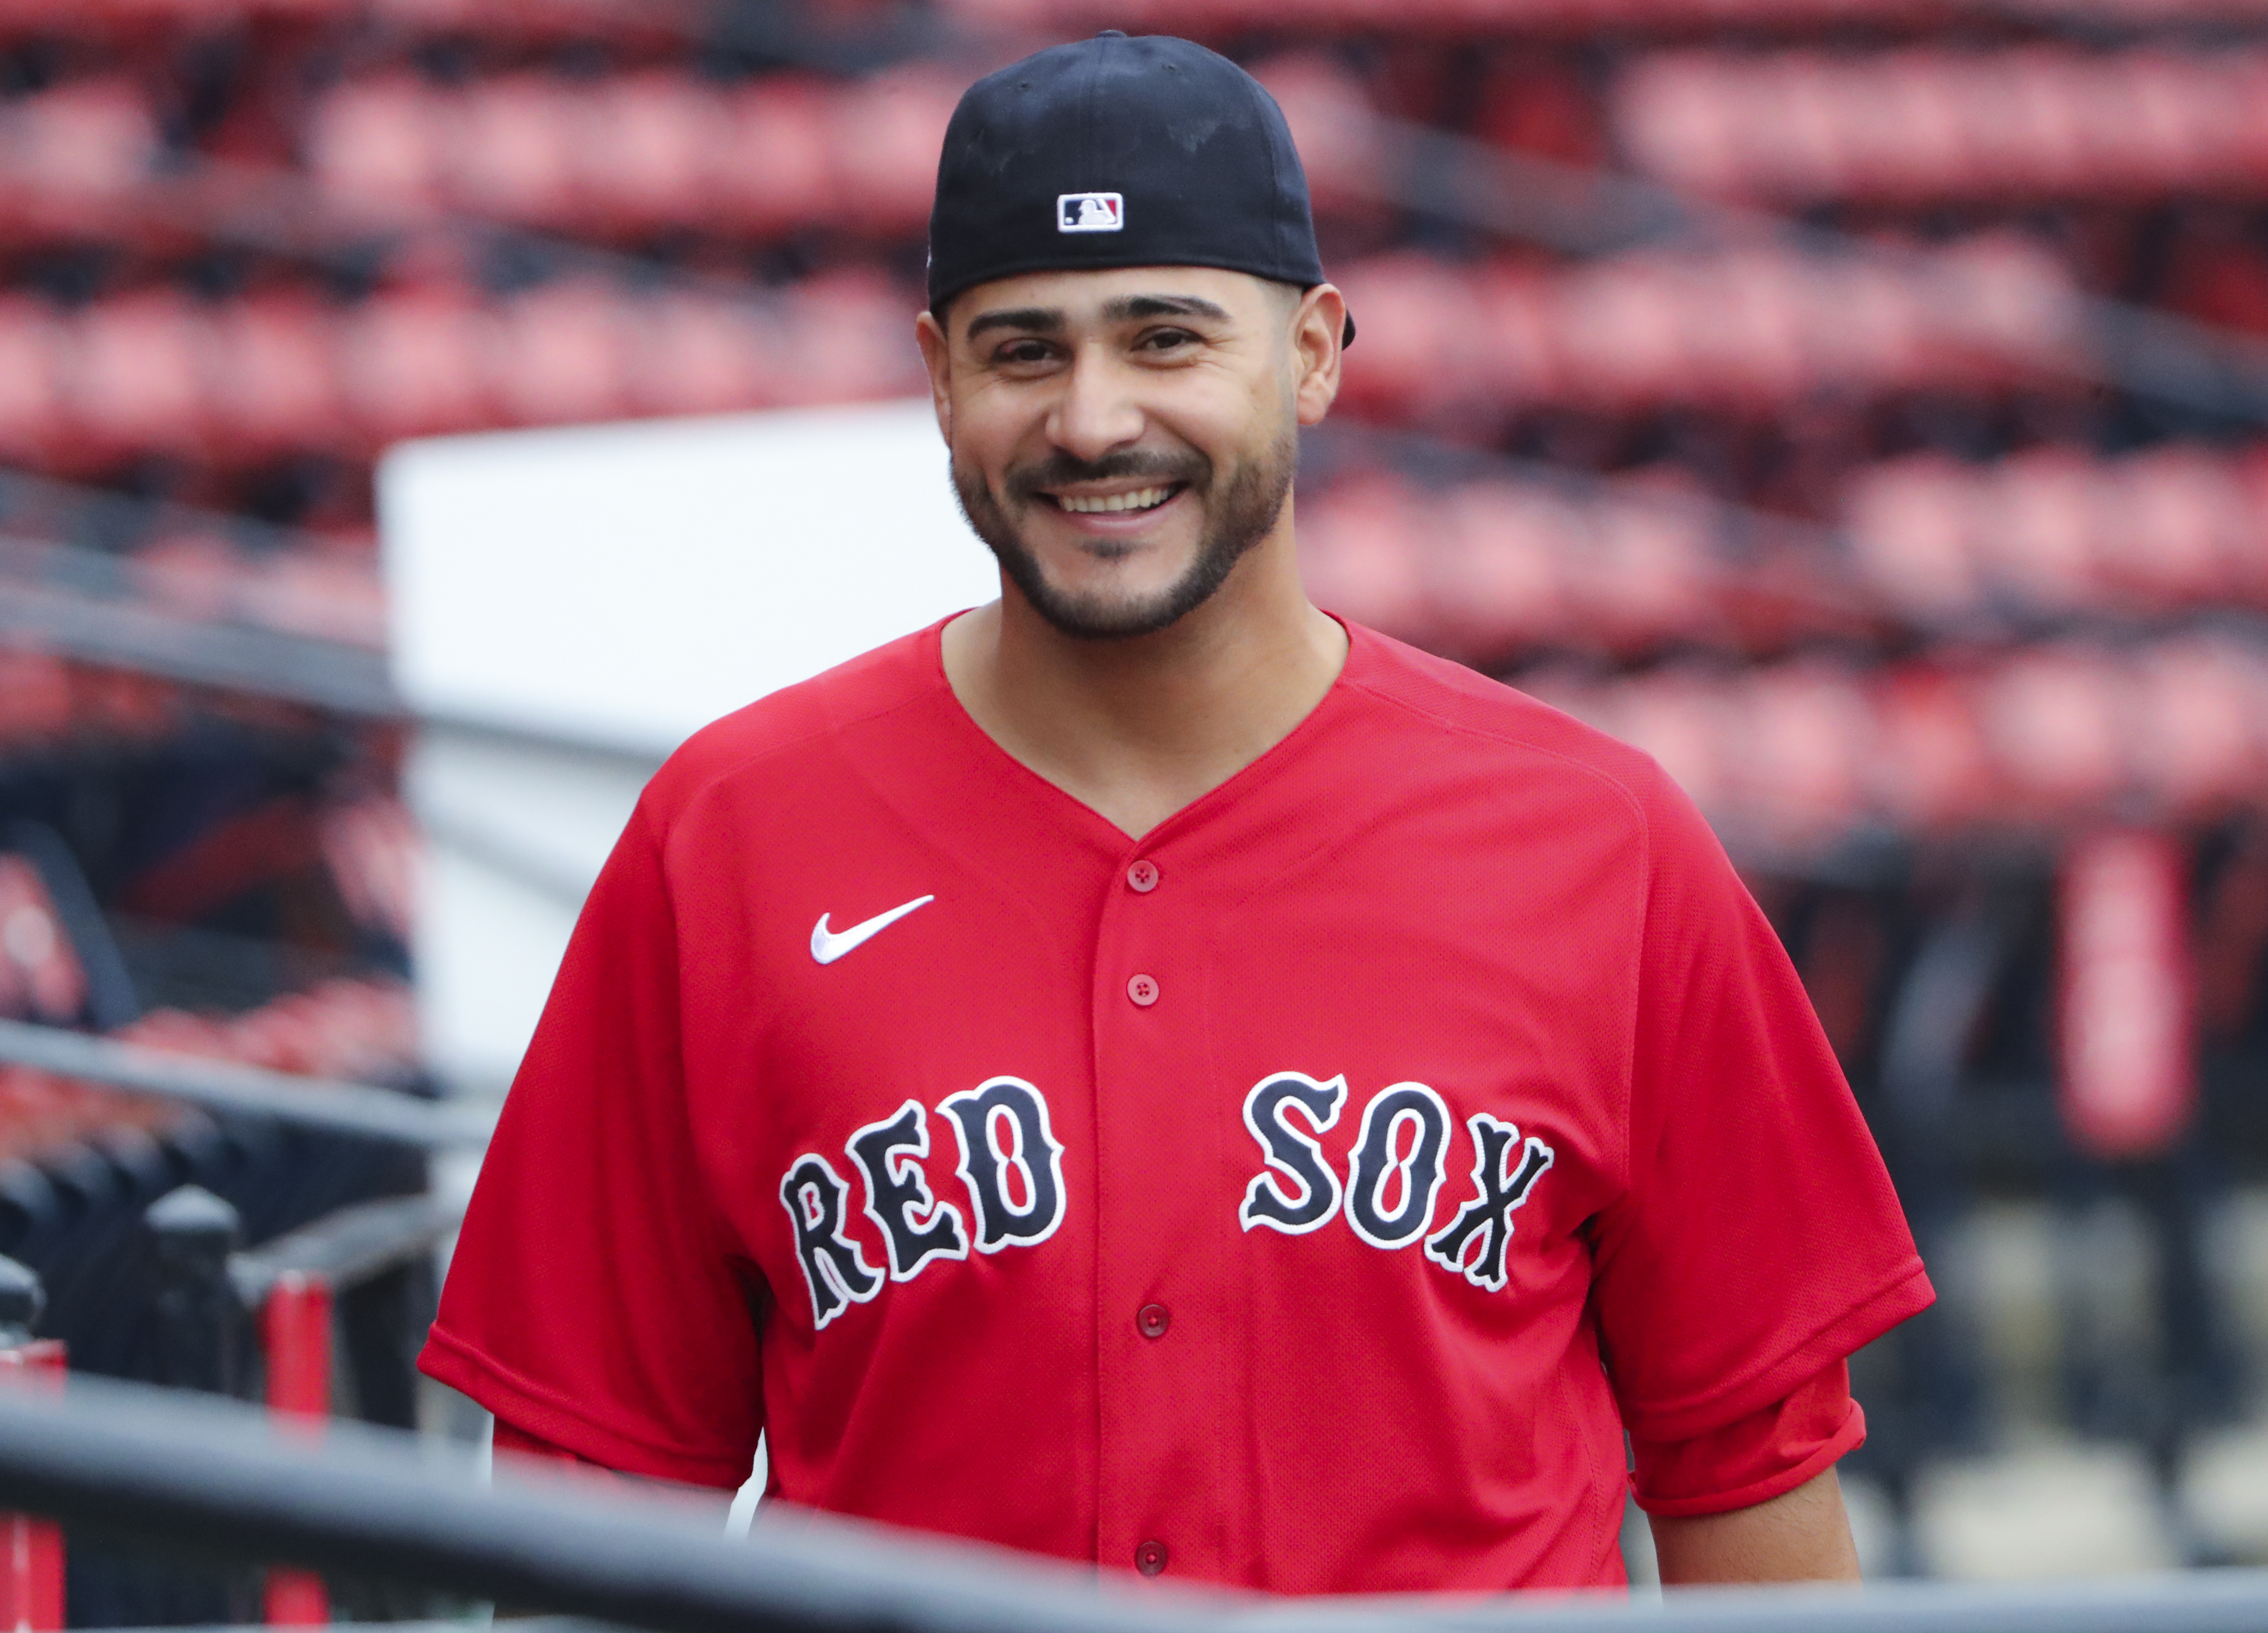 Pitcher Martin Perez returning to Red Sox